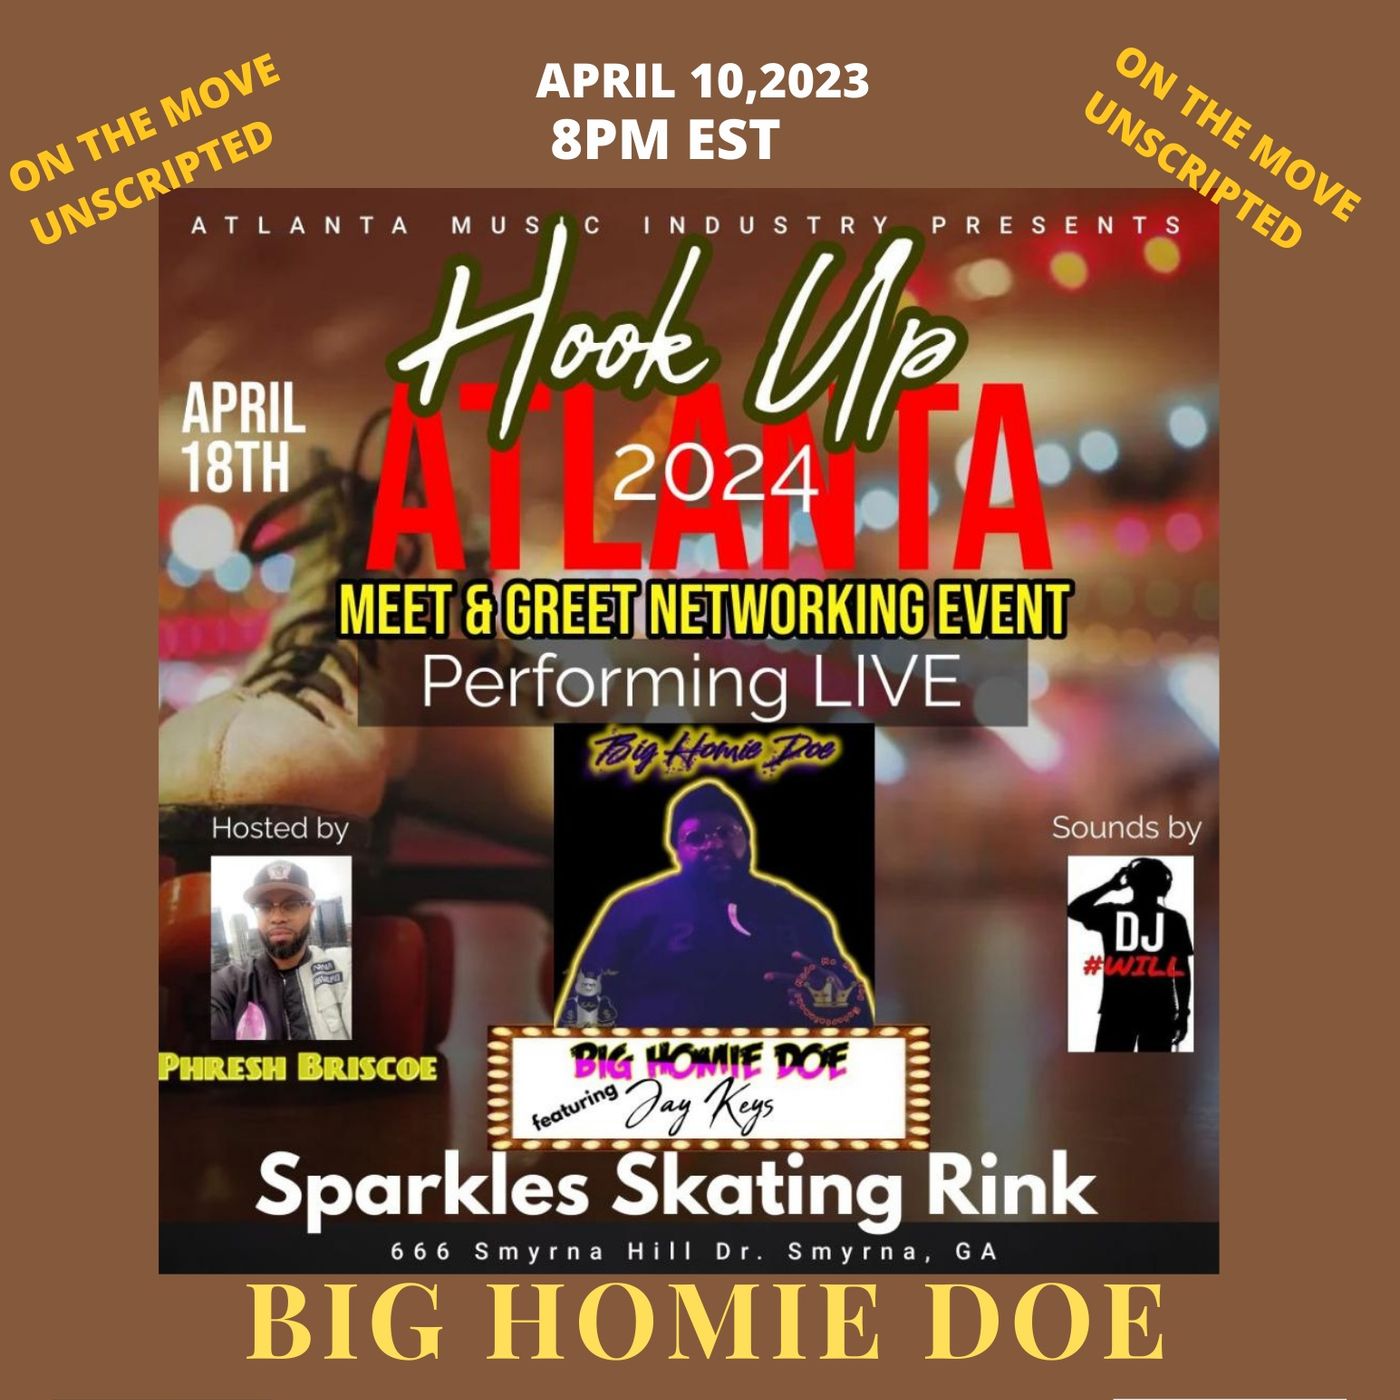 On The Move Unscripted & Hookup Atlanta Are Back! Check out our interview with Big Homie Doe